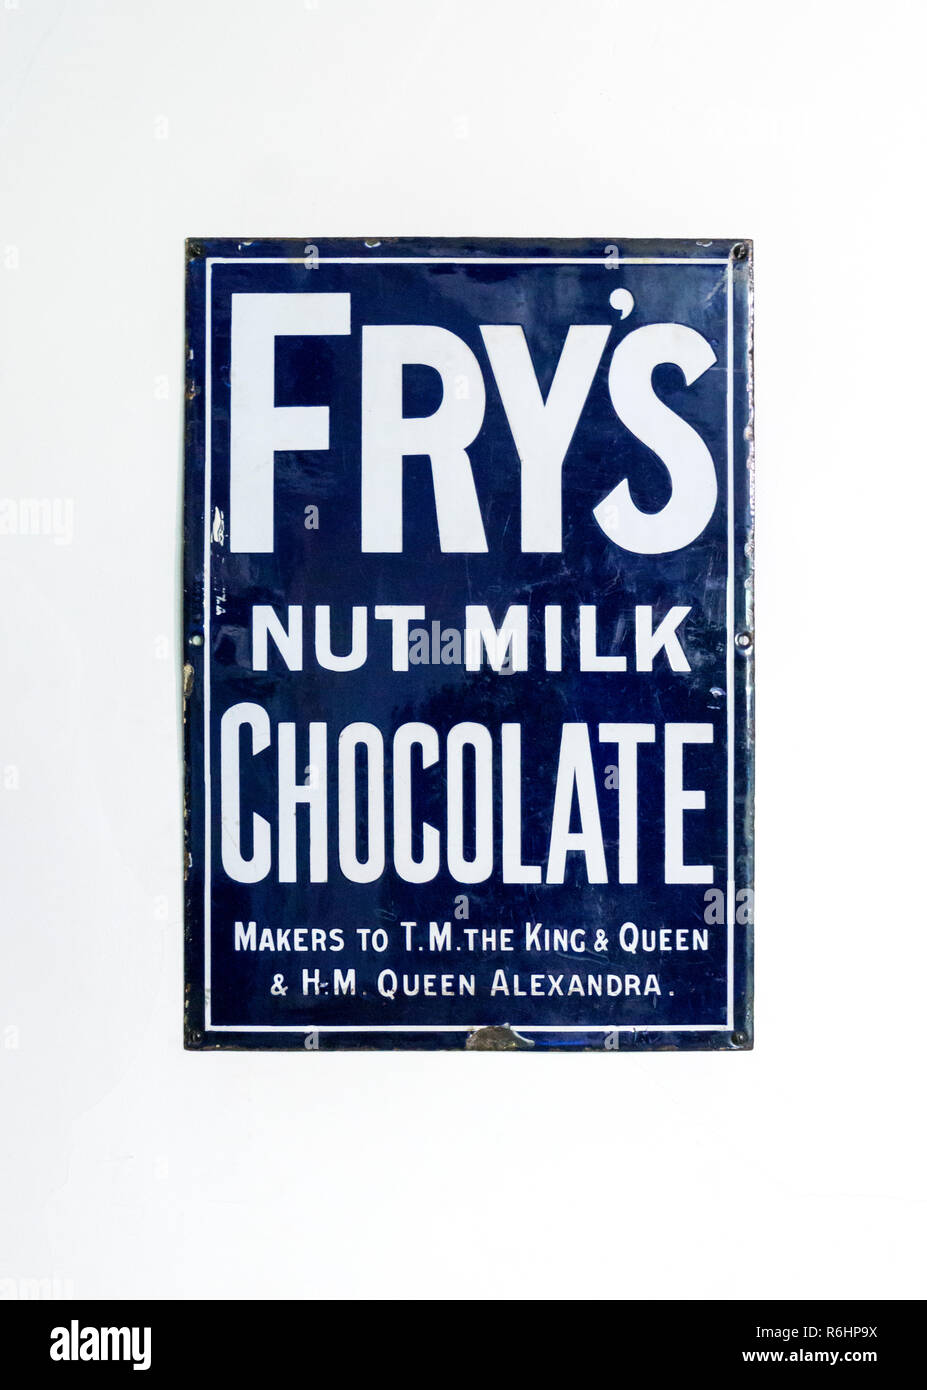 An old metal advertisement for Fry's Nut Milk Chocolate. Stock Photo